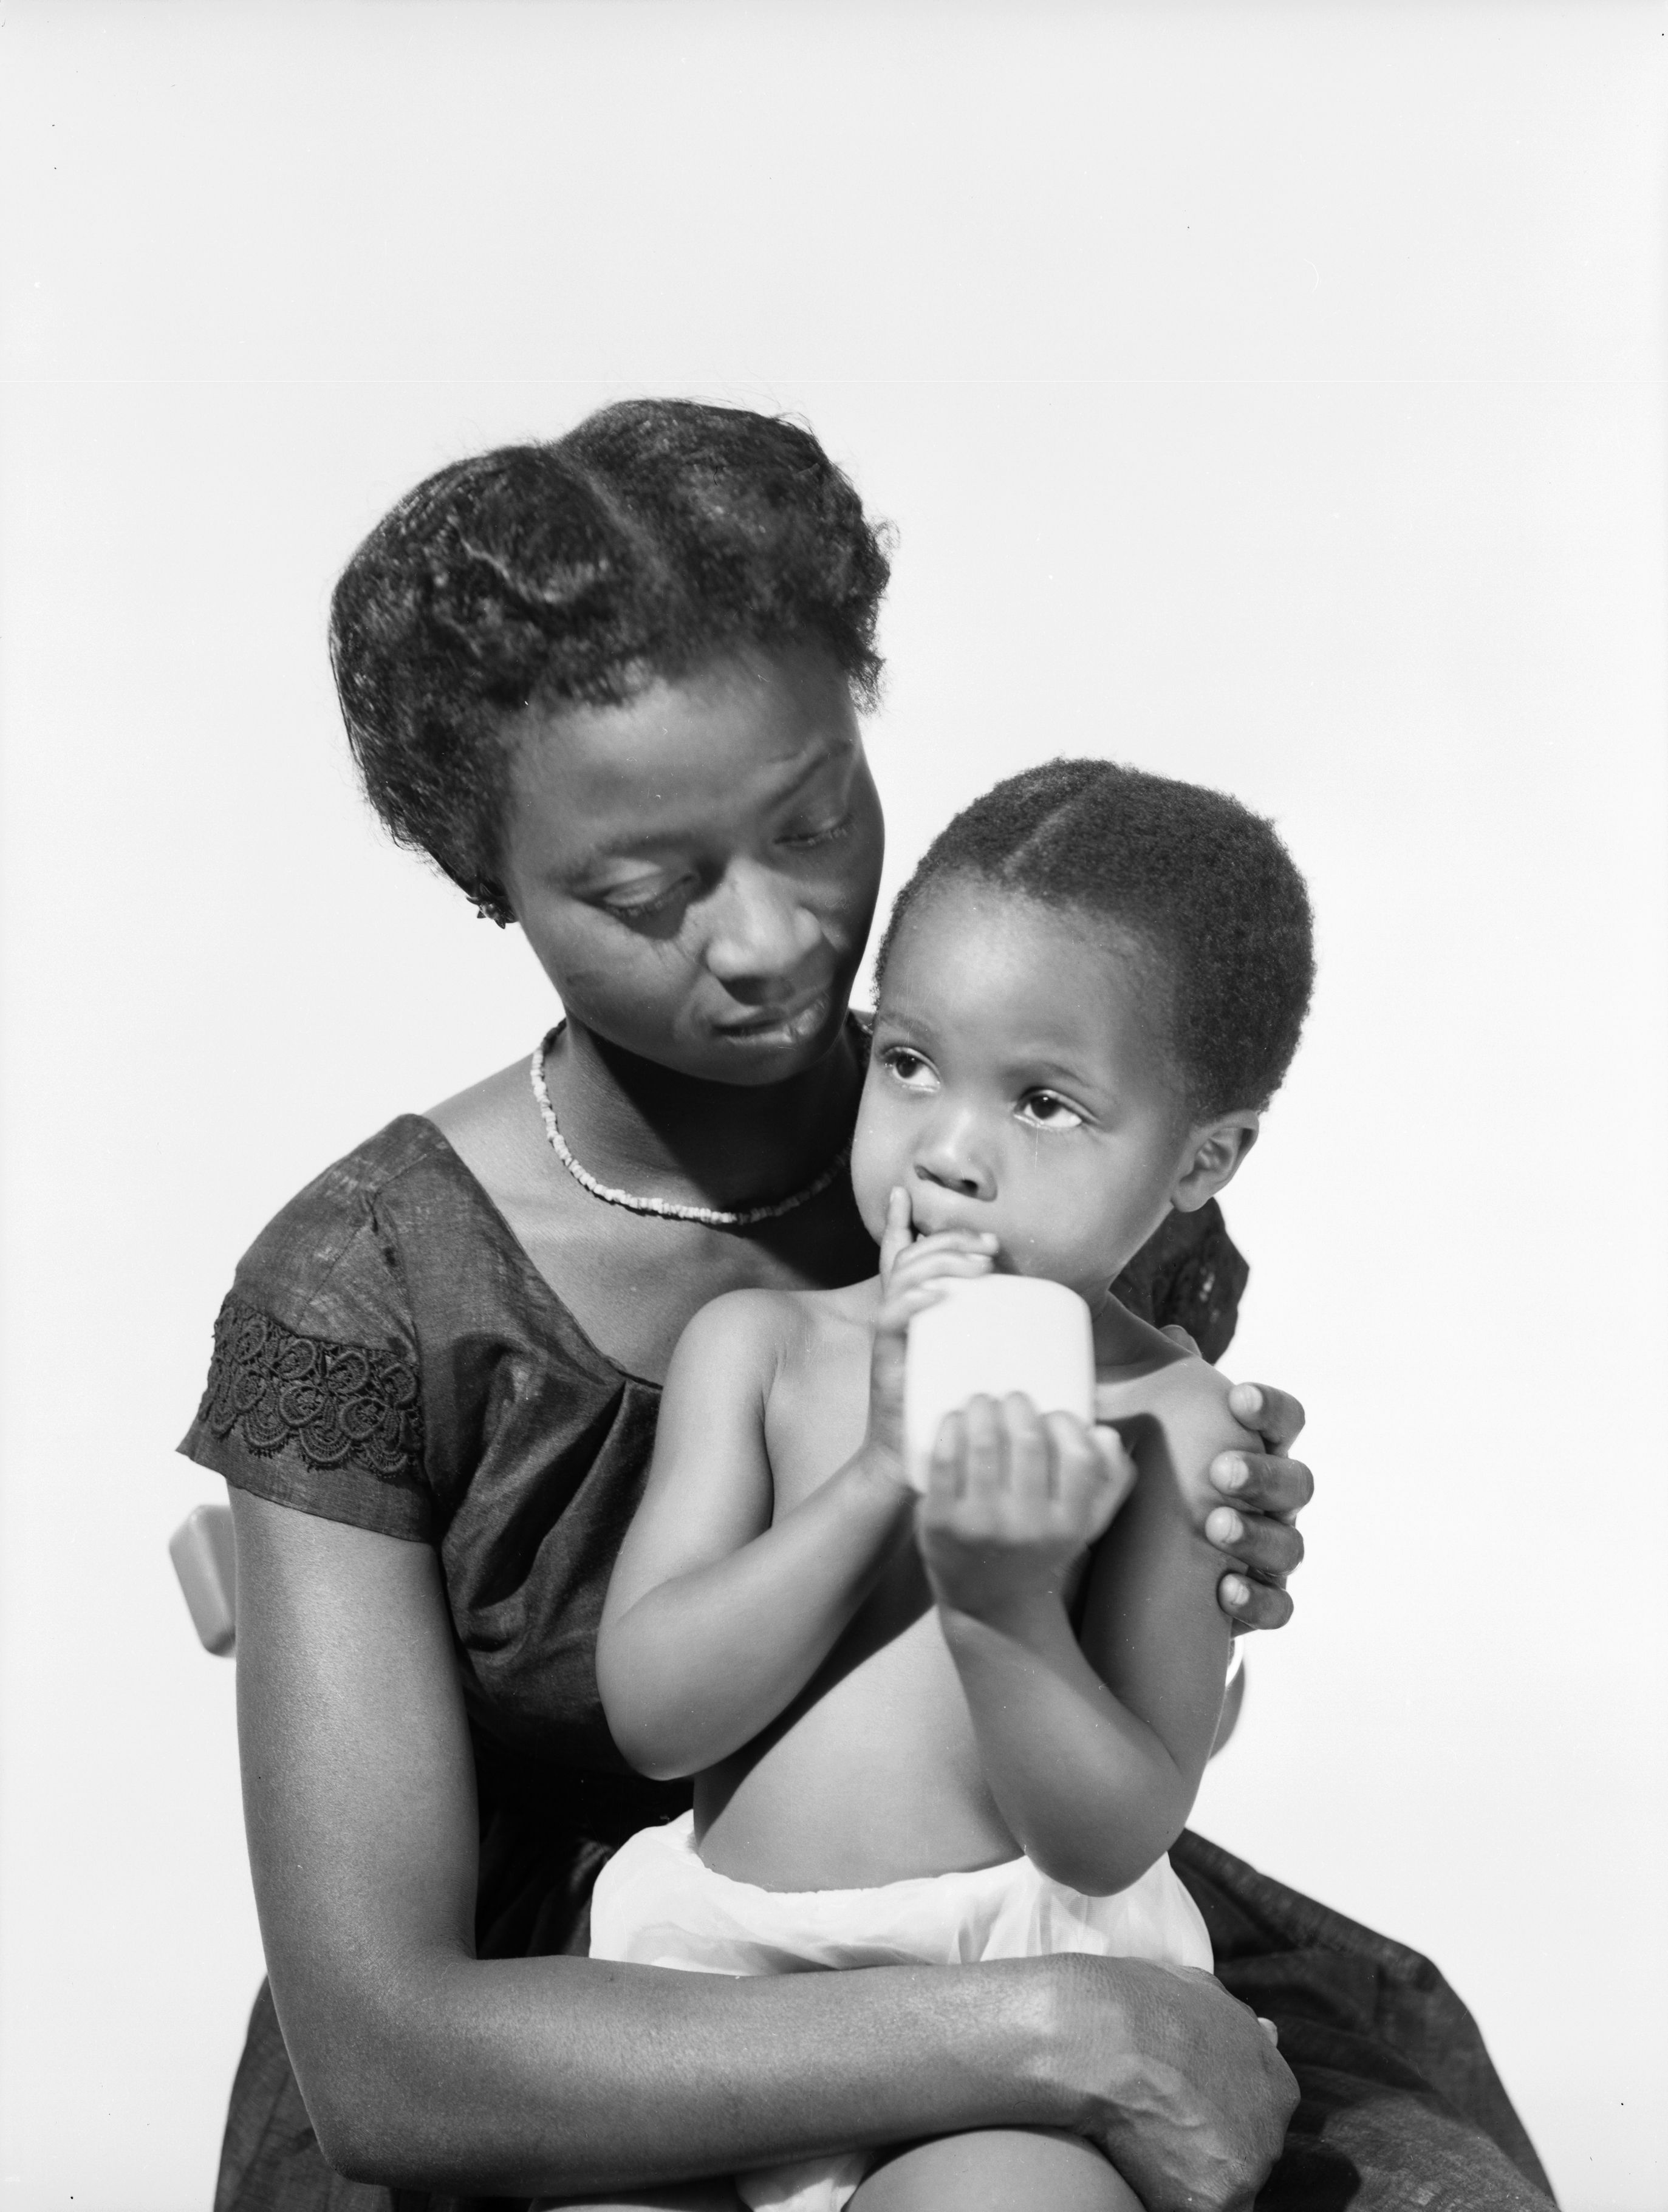 A woman in a black dress holding a black bag photo – With child